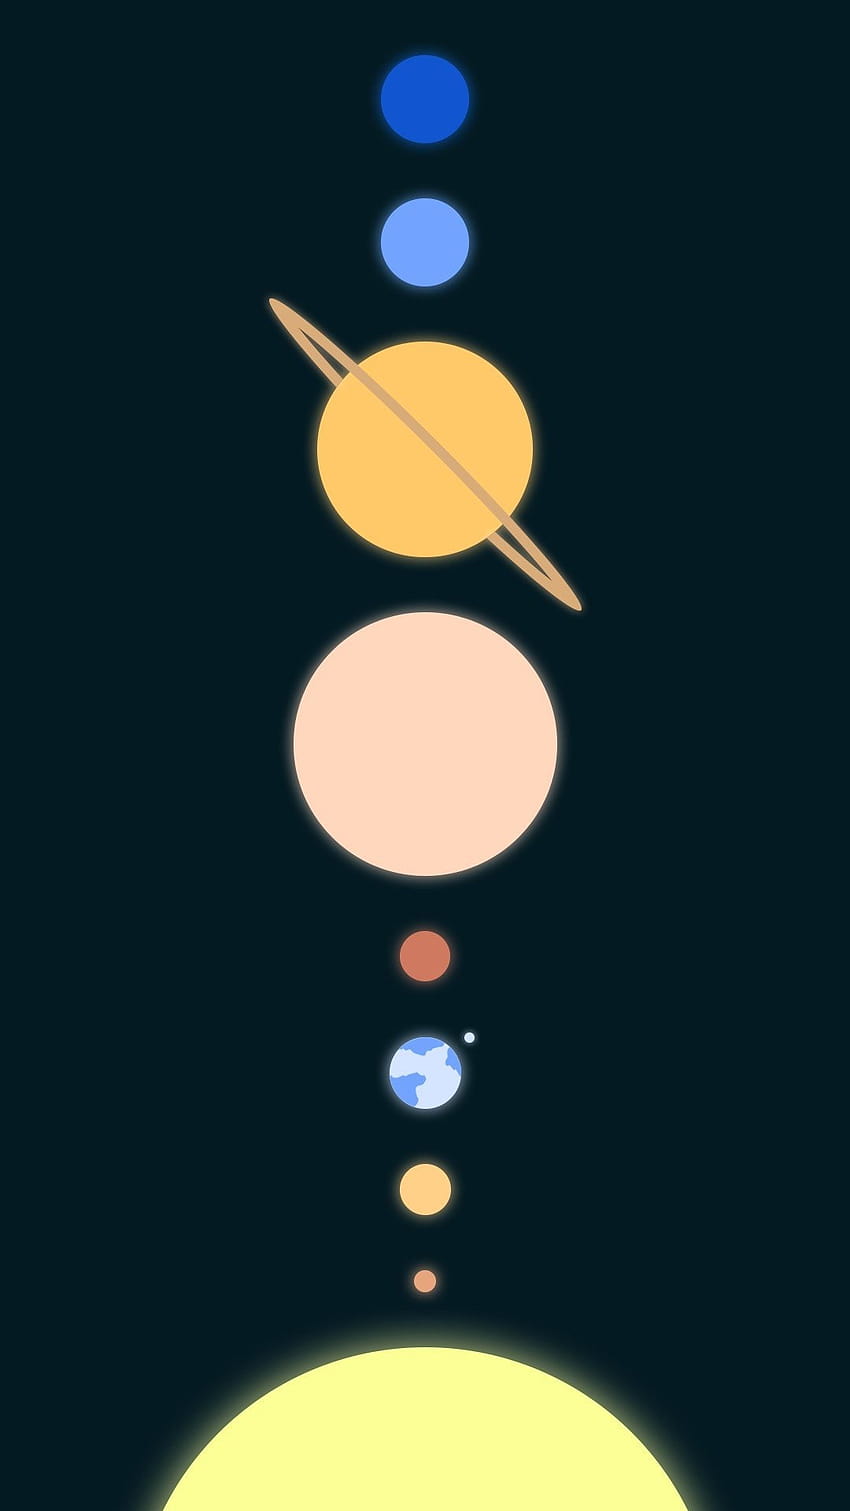 Solar System Minimal Android Backgrounds, solar system minimalist HD ...